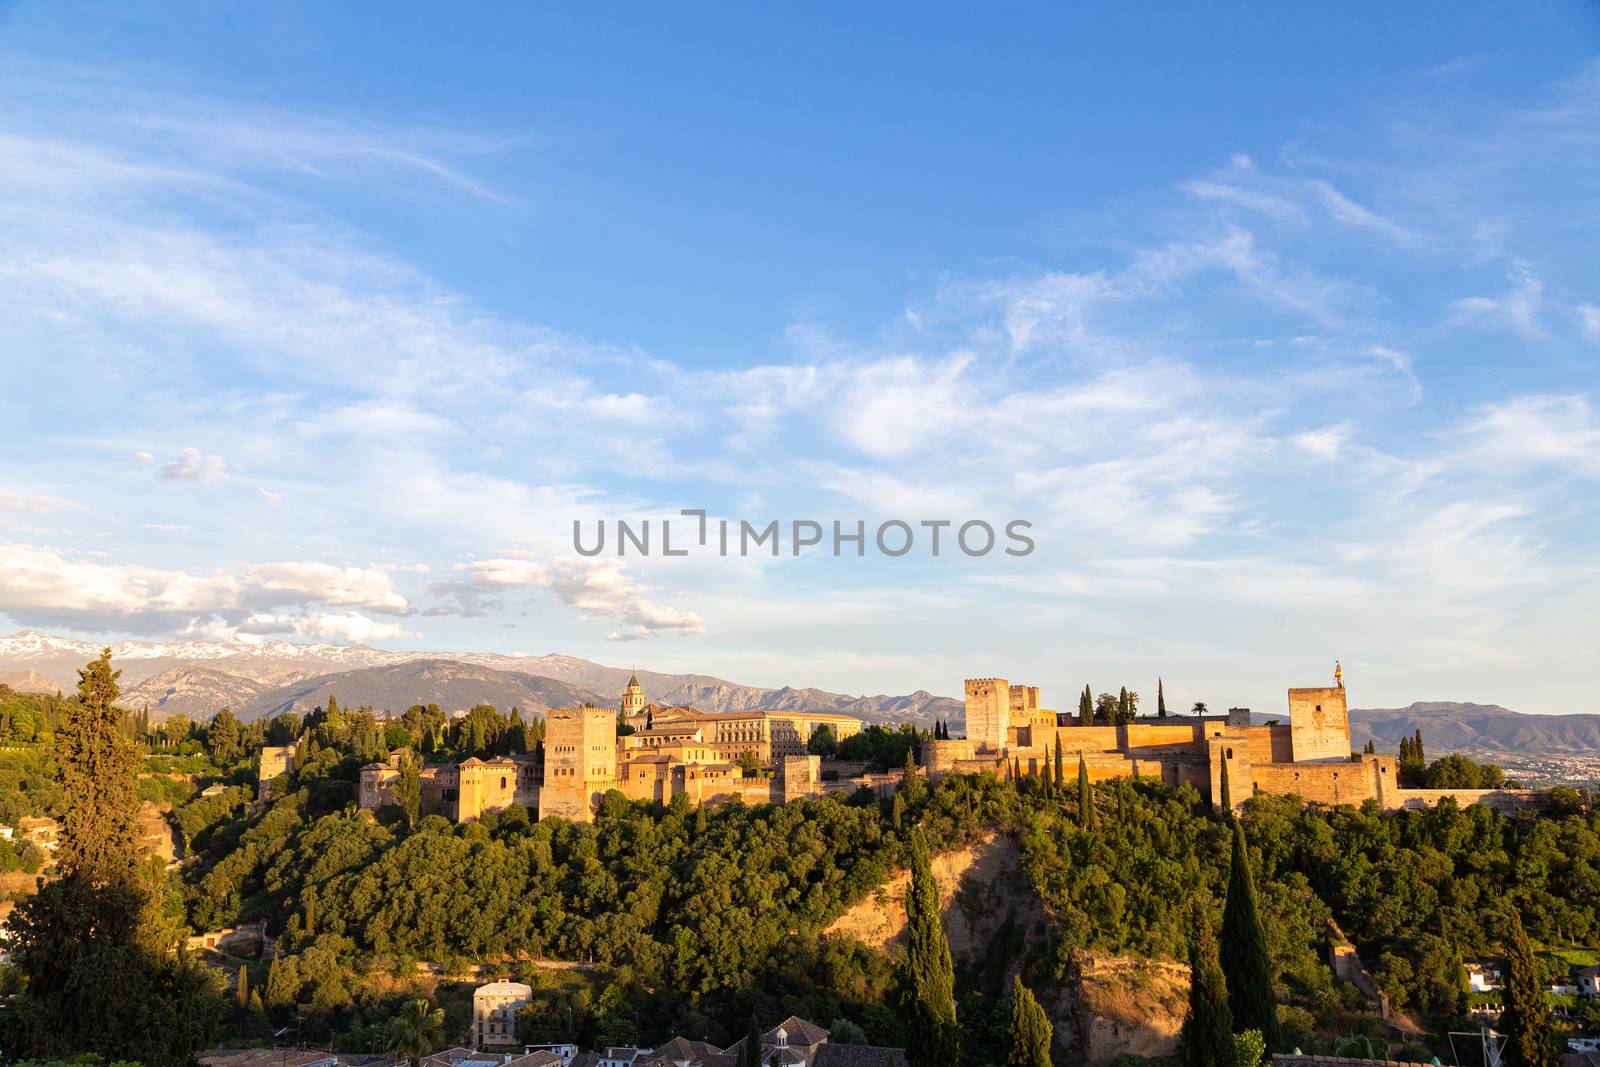 Granada, Spain - May 26, 2019: Exterior view of the famous Alhambra Palace